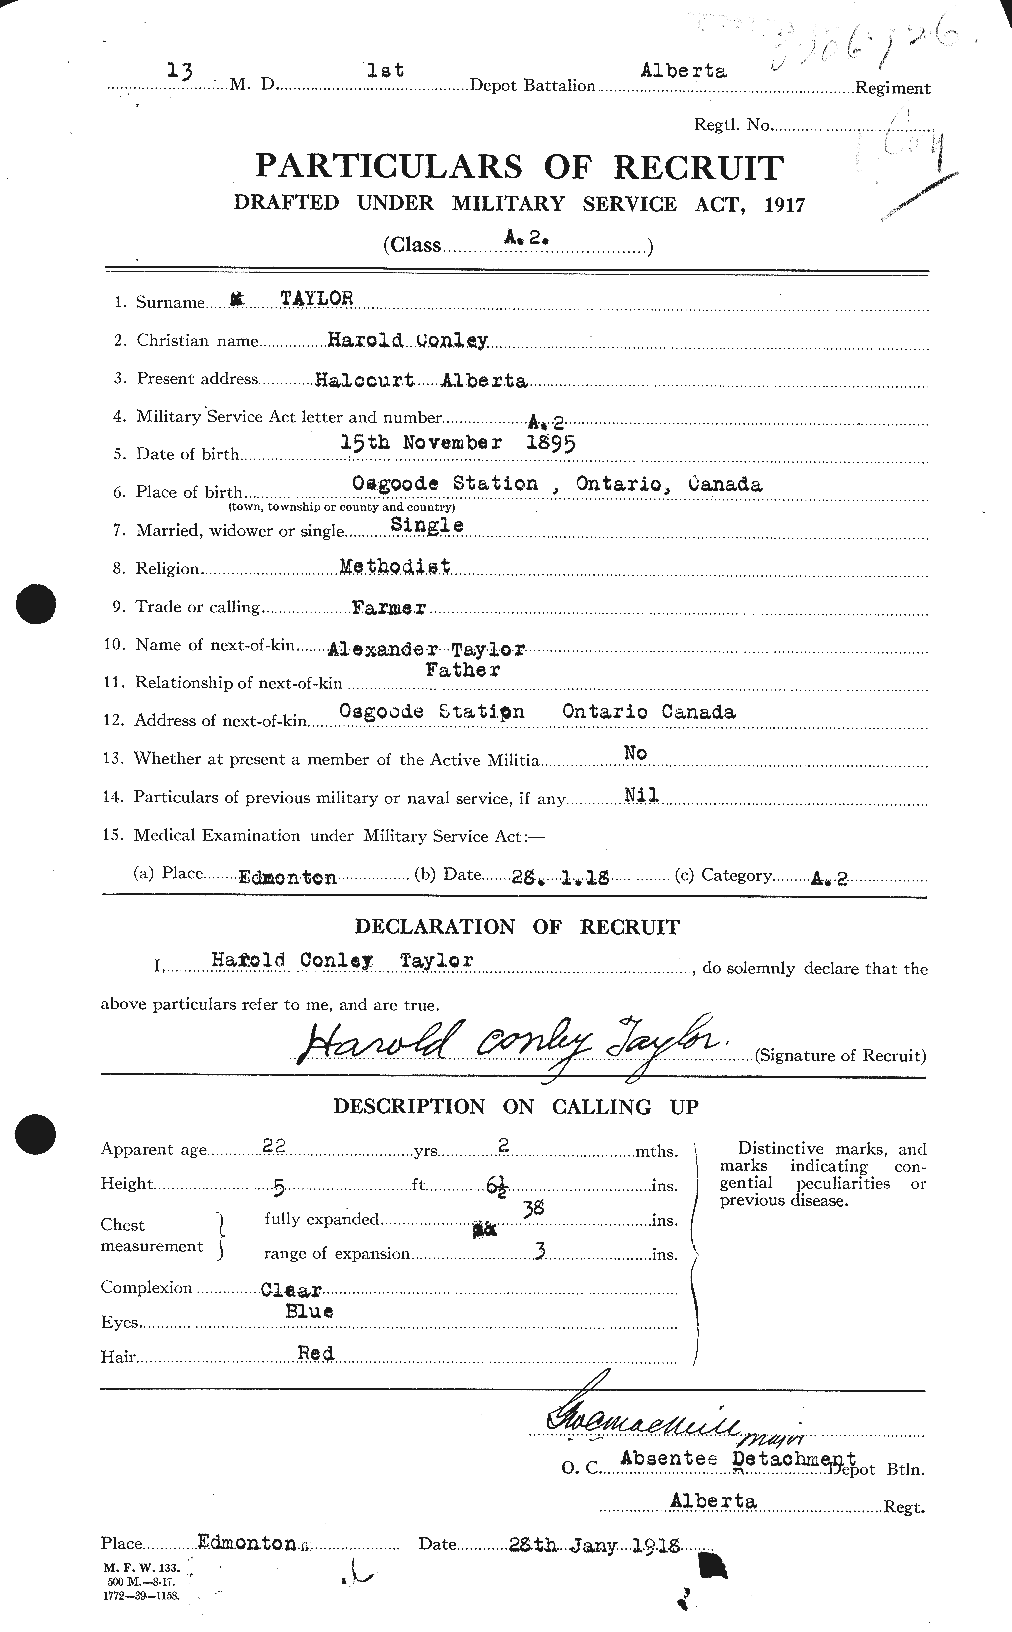 Personnel Records of the First World War - CEF 626417a